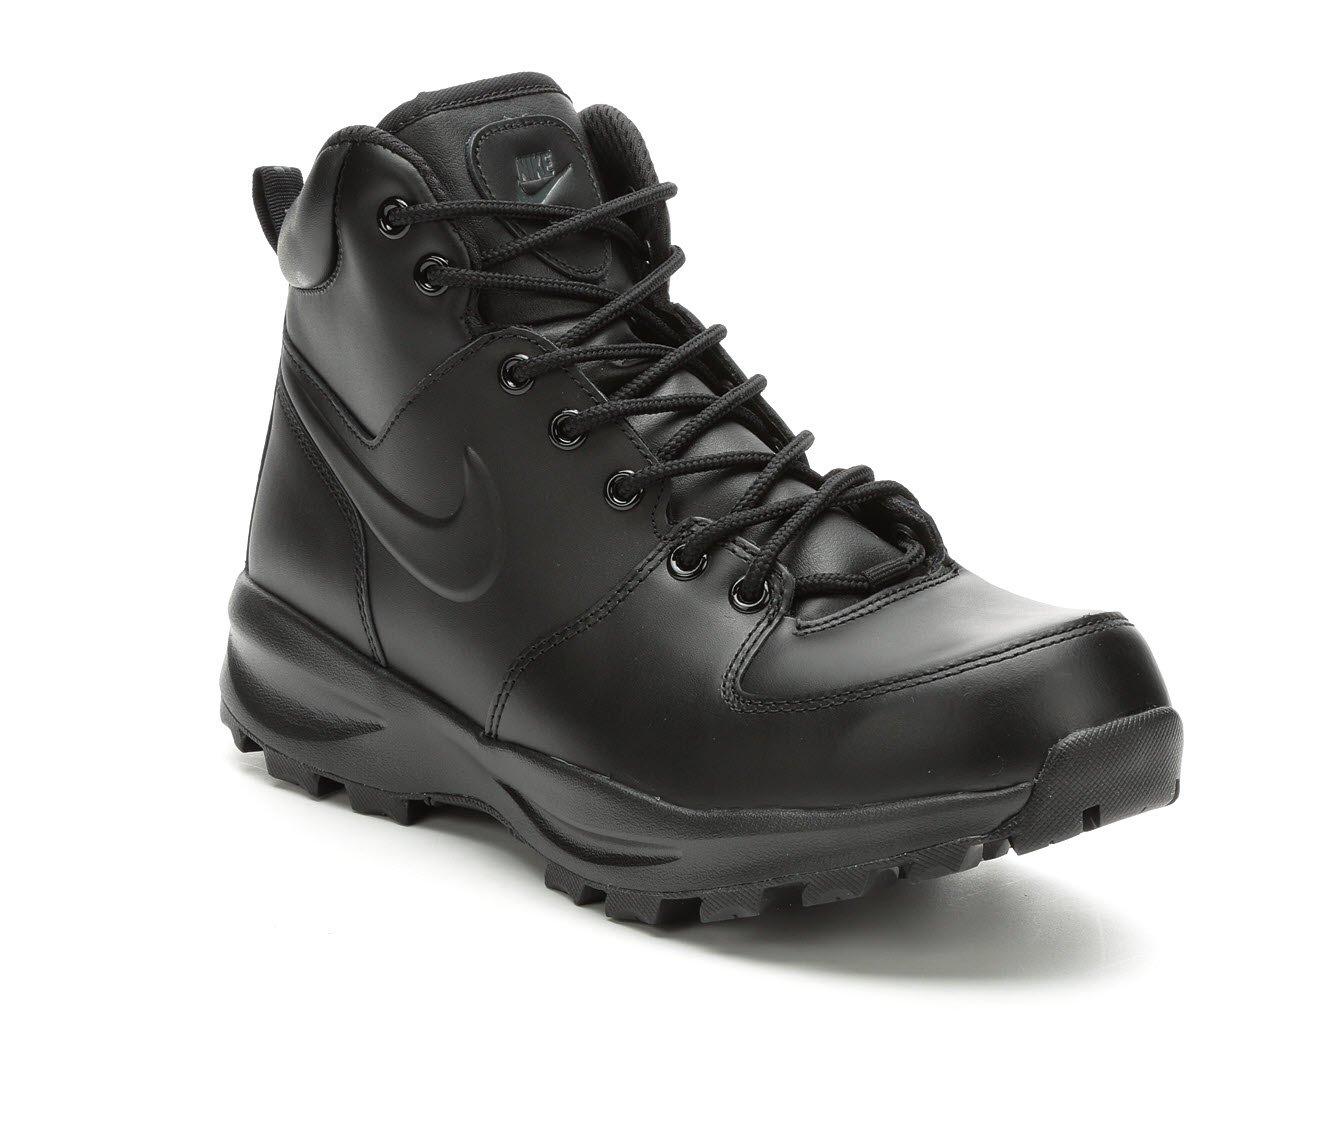 wees stil Ongepast licentie Men's Nike Manoa Leather Lace-Up Boots | Shoe Carnival